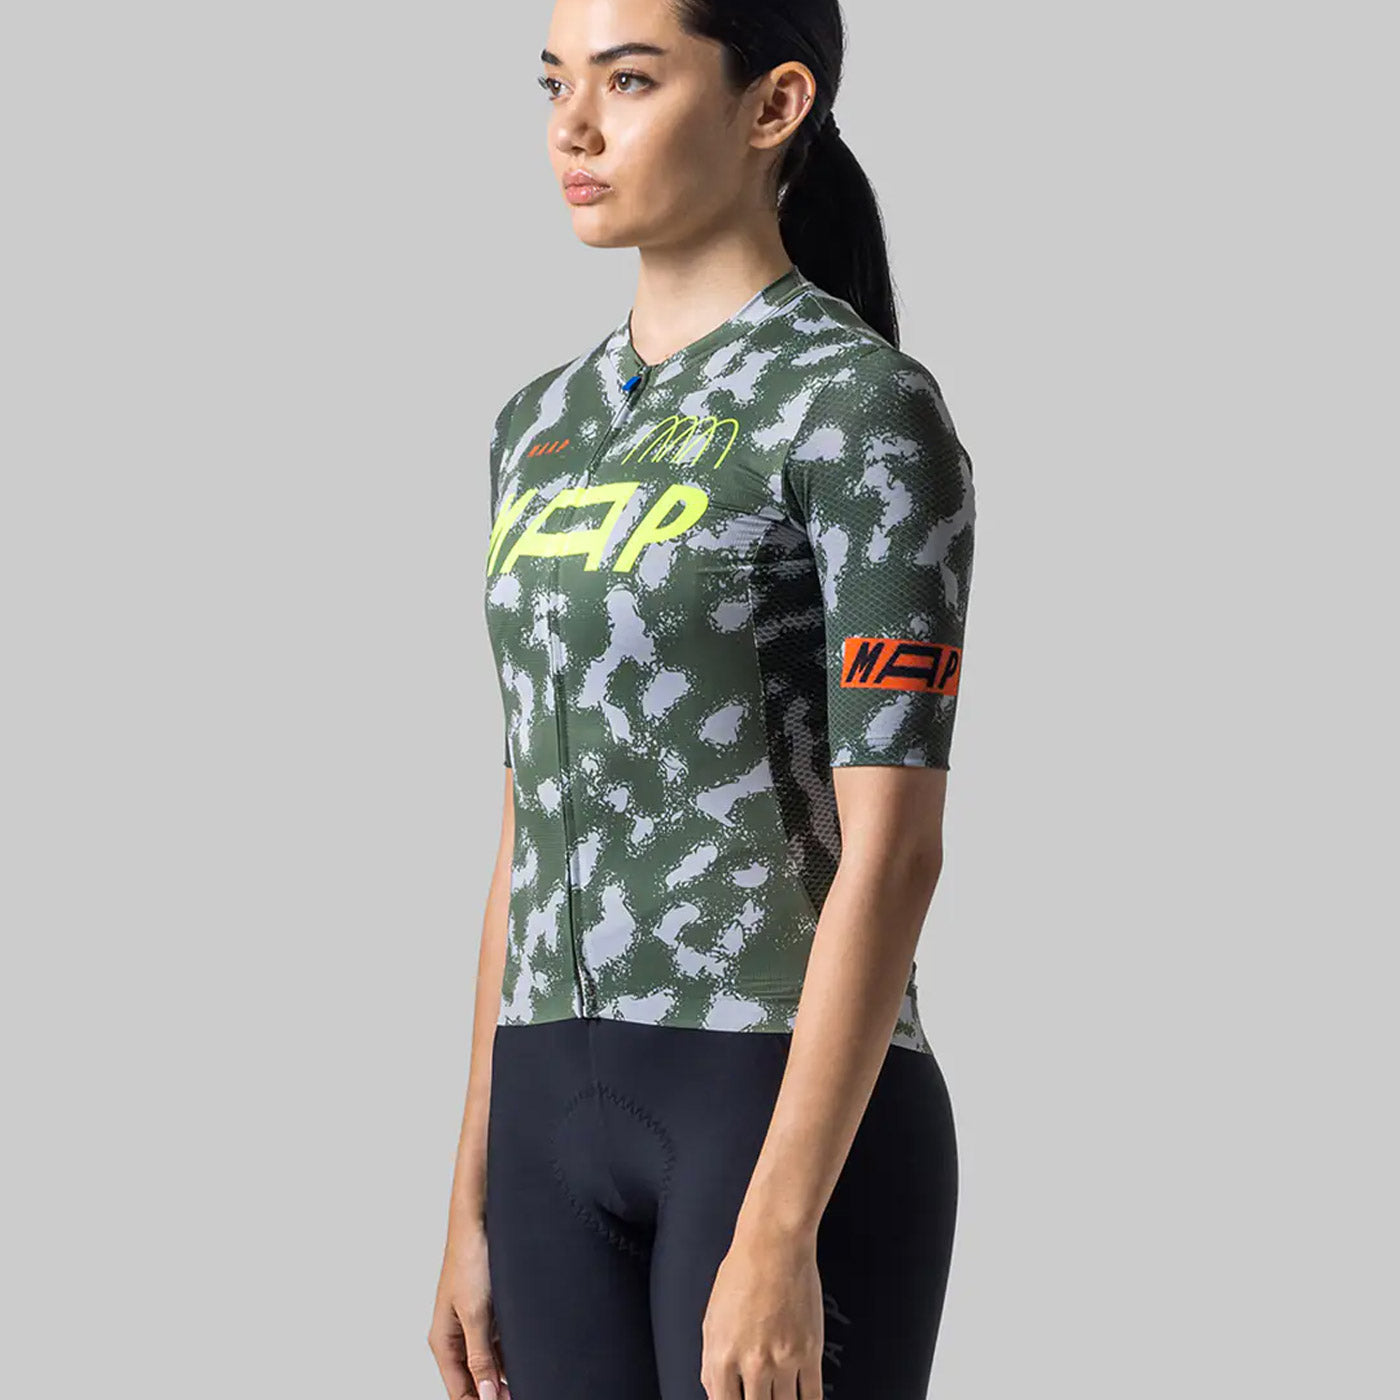 Maap Adapted I.S Pro Air women jersey - Green | All4cycling